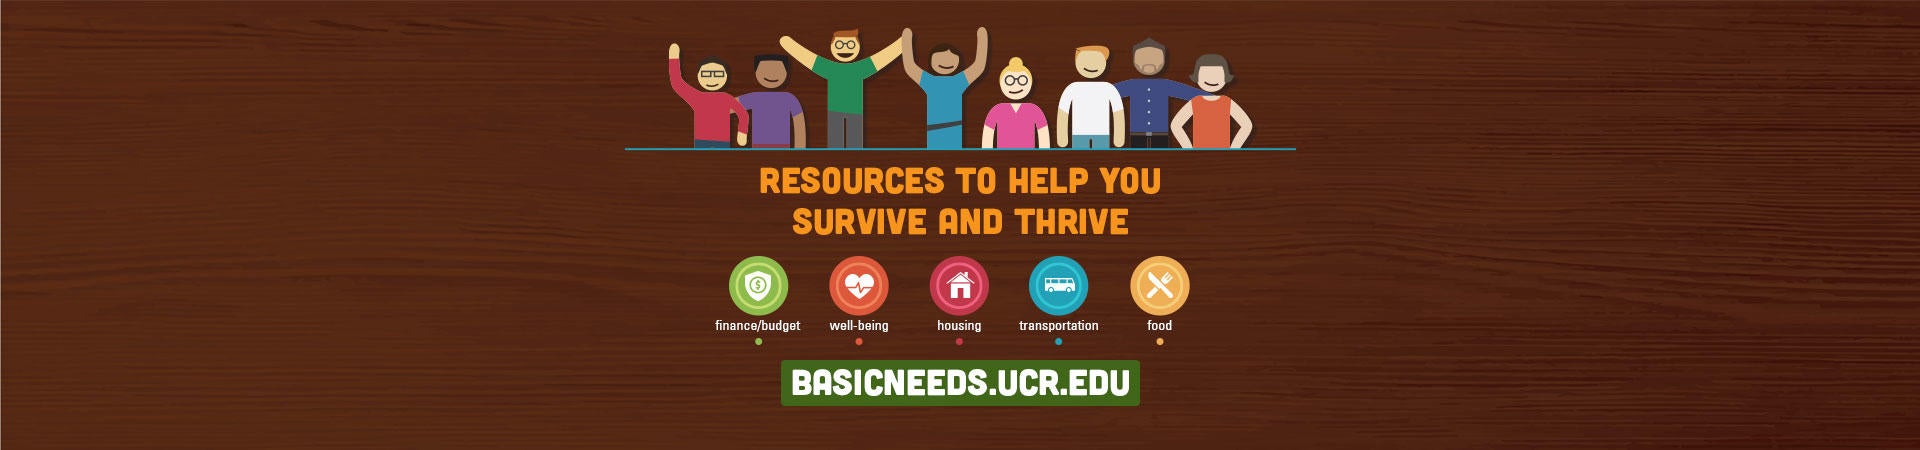 Basic Needs: Resources to Help You Survive & Thrive